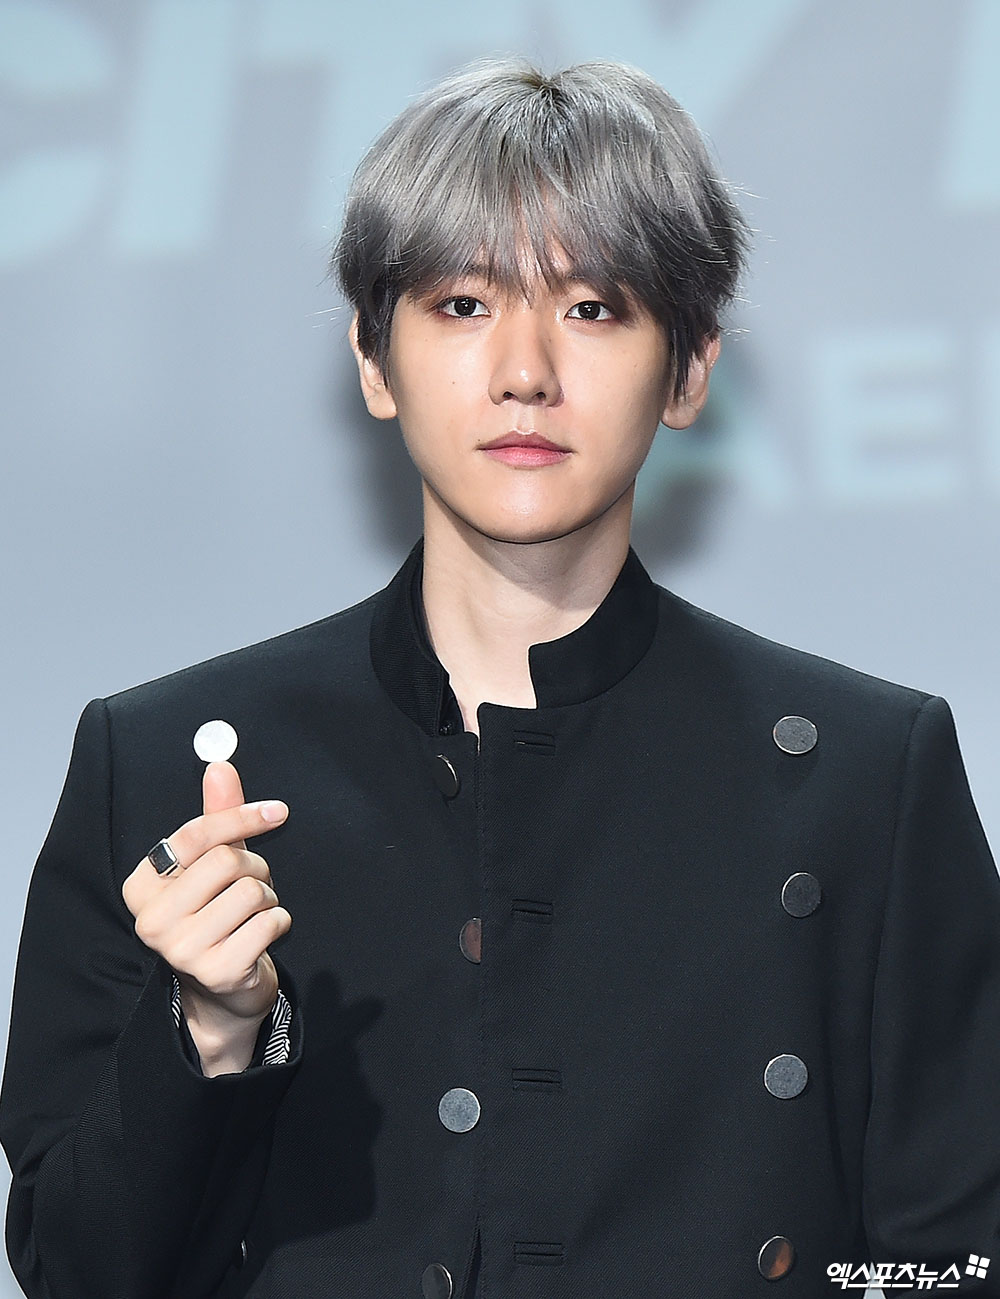 Baekhyun, who released his solo album, gave a special impression.On the 10th, Showcase was held at SAC Art Hall in Gangnam-gu, Seoul to commemorate the release of the solo album City Lights by group EXO Baekhyun.The first solo City Lights by EXOs main vocalist, Baekhyun, featured six songs in a trendy atmosphere.The title is UN Village, a romantic R & B song. Baekhyun presented Love Live! with stand microphone.I have shown you various activities in EXO and EXO Chenbak City, but when I was working as a solo, I was not burdened at first, said Baekhyun. I have no members to expect and I have to show myself completely.I am looking forward to what it will be like today, and I think I want to show it quickly. He said, I went to a good place where I only know my lover and I love him, and I had romantic lyrics that whispered love while watching the good scenery.My superpower is light, said Baekhyun, with the identity of Baekhyun, City Lights.When I listen to the EXO title and the songs, I have a choice in 10 seconds. I did not say this because it was my song. I was captivated in 10 seconds.I did not do well with correction recording, but I also made correction recordings about 2,3 times. I wanted to include my own emotions.I hope that many people will like it, and I would like you to feel that there was such a color for Baekhyun because it shows a genre that I did not usually show.Meanwhile, Baekhyun will open a fan showcase at 8 pm after releasing the album at 6 pm and release the stage to fans.This showcase is broadcast live worldwide through VLove Live!